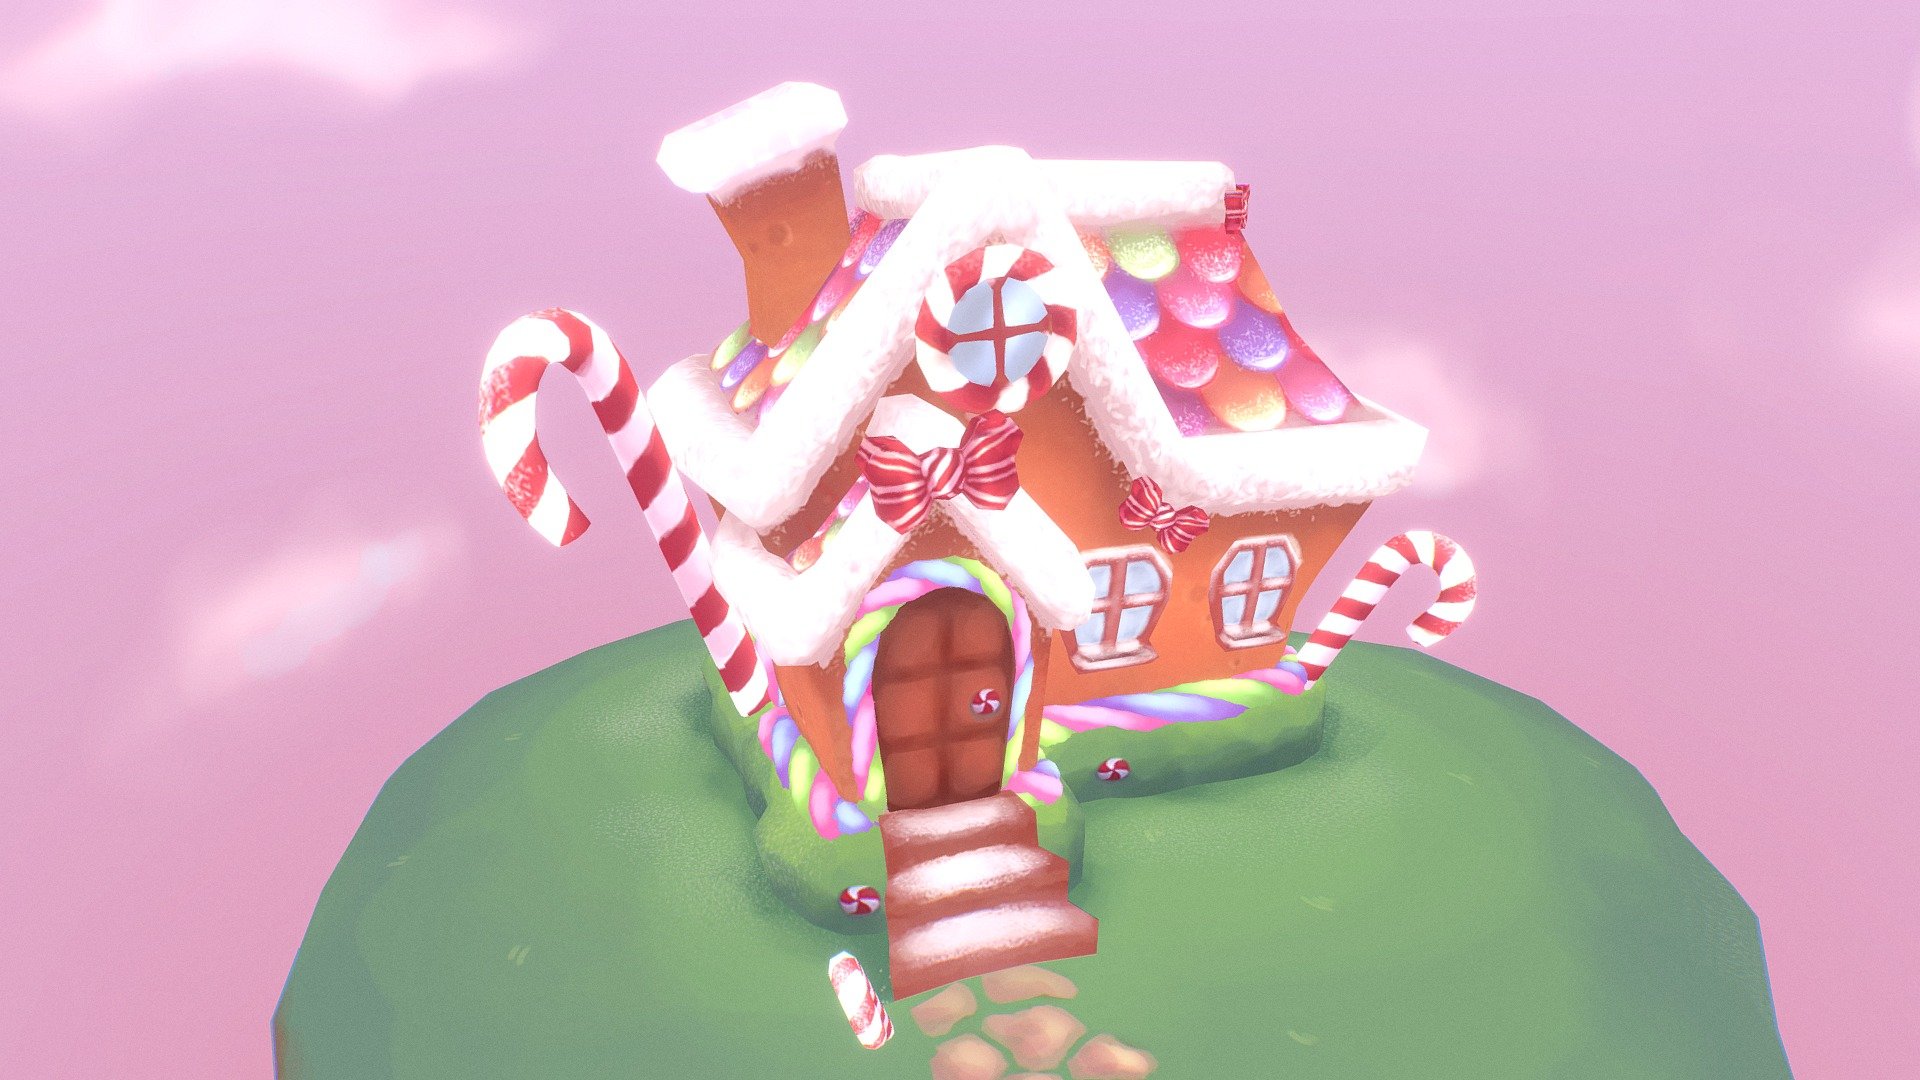 I've been wanting to create a candy-themed piece for a while, so this was a whole lot of fun to make! Wanted to go for a real cartoonish, completely handpainted look, so this is my first time using just a diffuse map for piece.

Created in 4 weeks as an assessment piece using Maya, Photoshop and 3D Coat. 

Any feedback would be much appreciated! - Candy Cottage - 3D model by Vinnie D'Cruz (@morques) 3d model